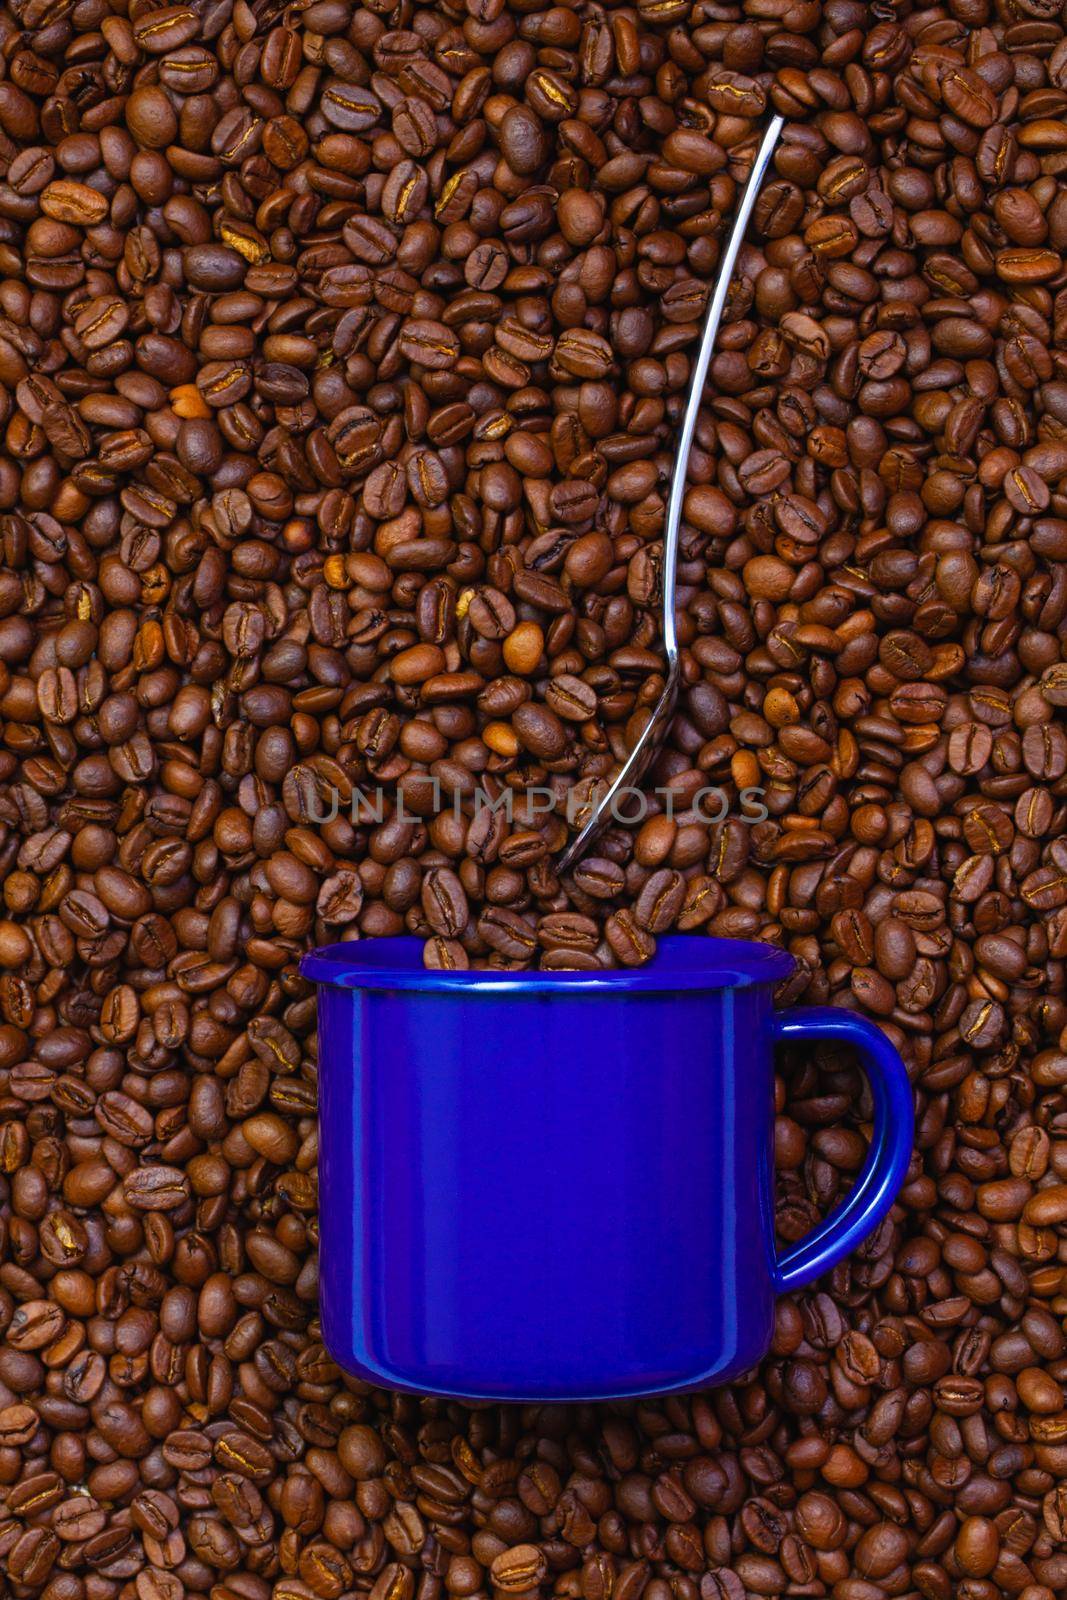 Blue cup of coffee on a table full of coffee beans.  Coffee design.